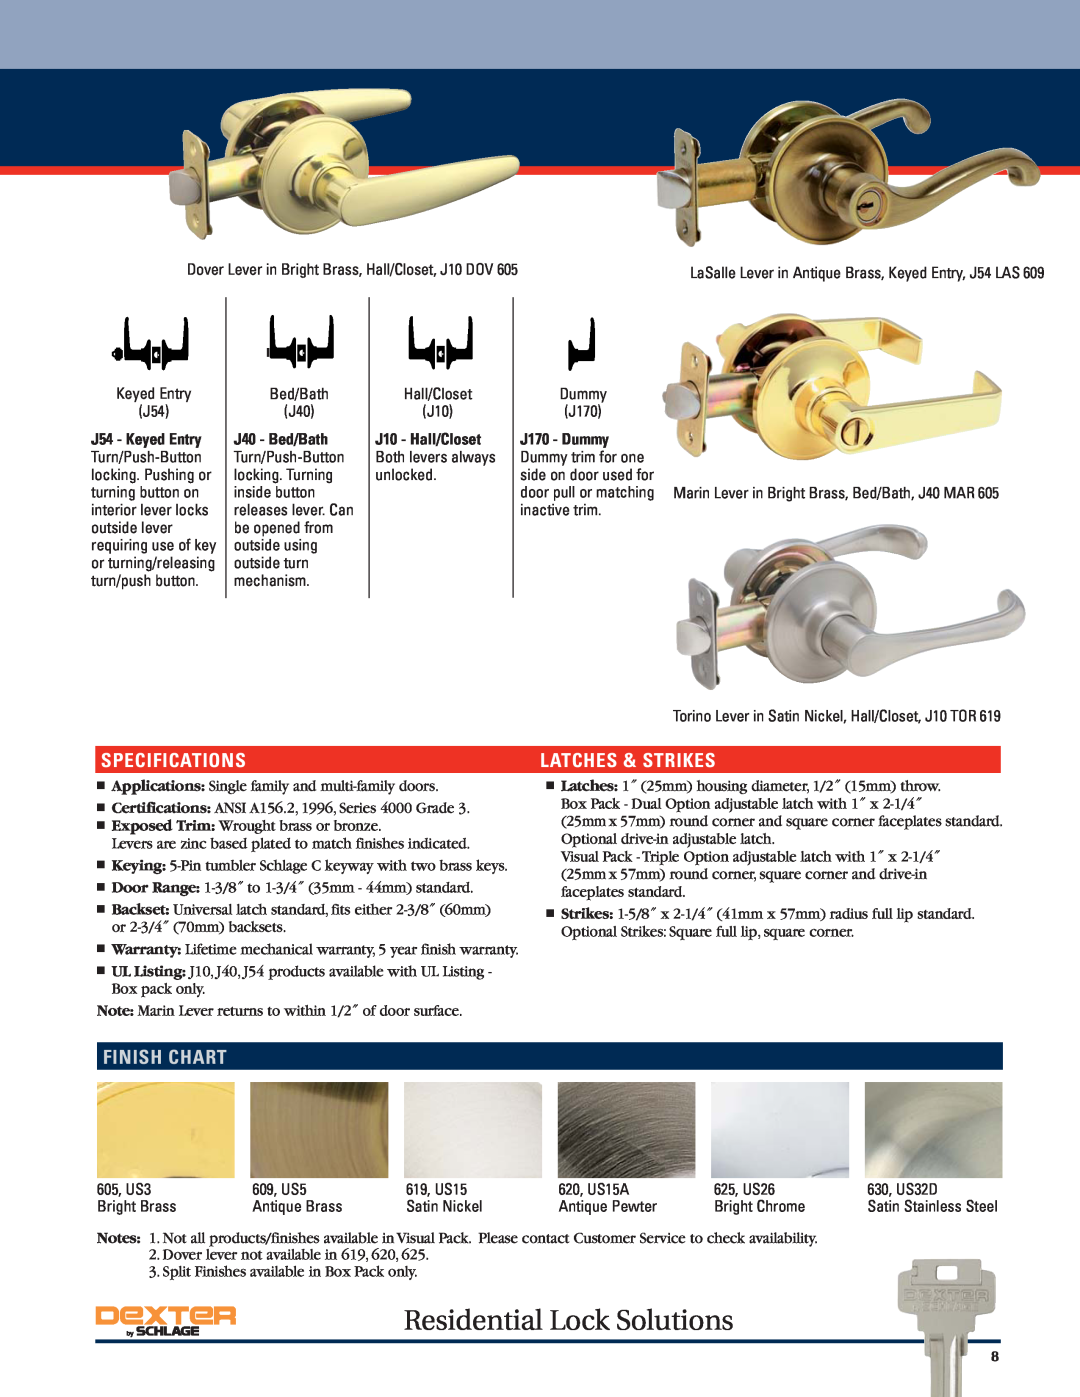 Schlage Residential Lock Solutions, Specifications, Latches & Strikes, Finish Chart, J54 - Keyed Entry, J40 - Bed/Bath 